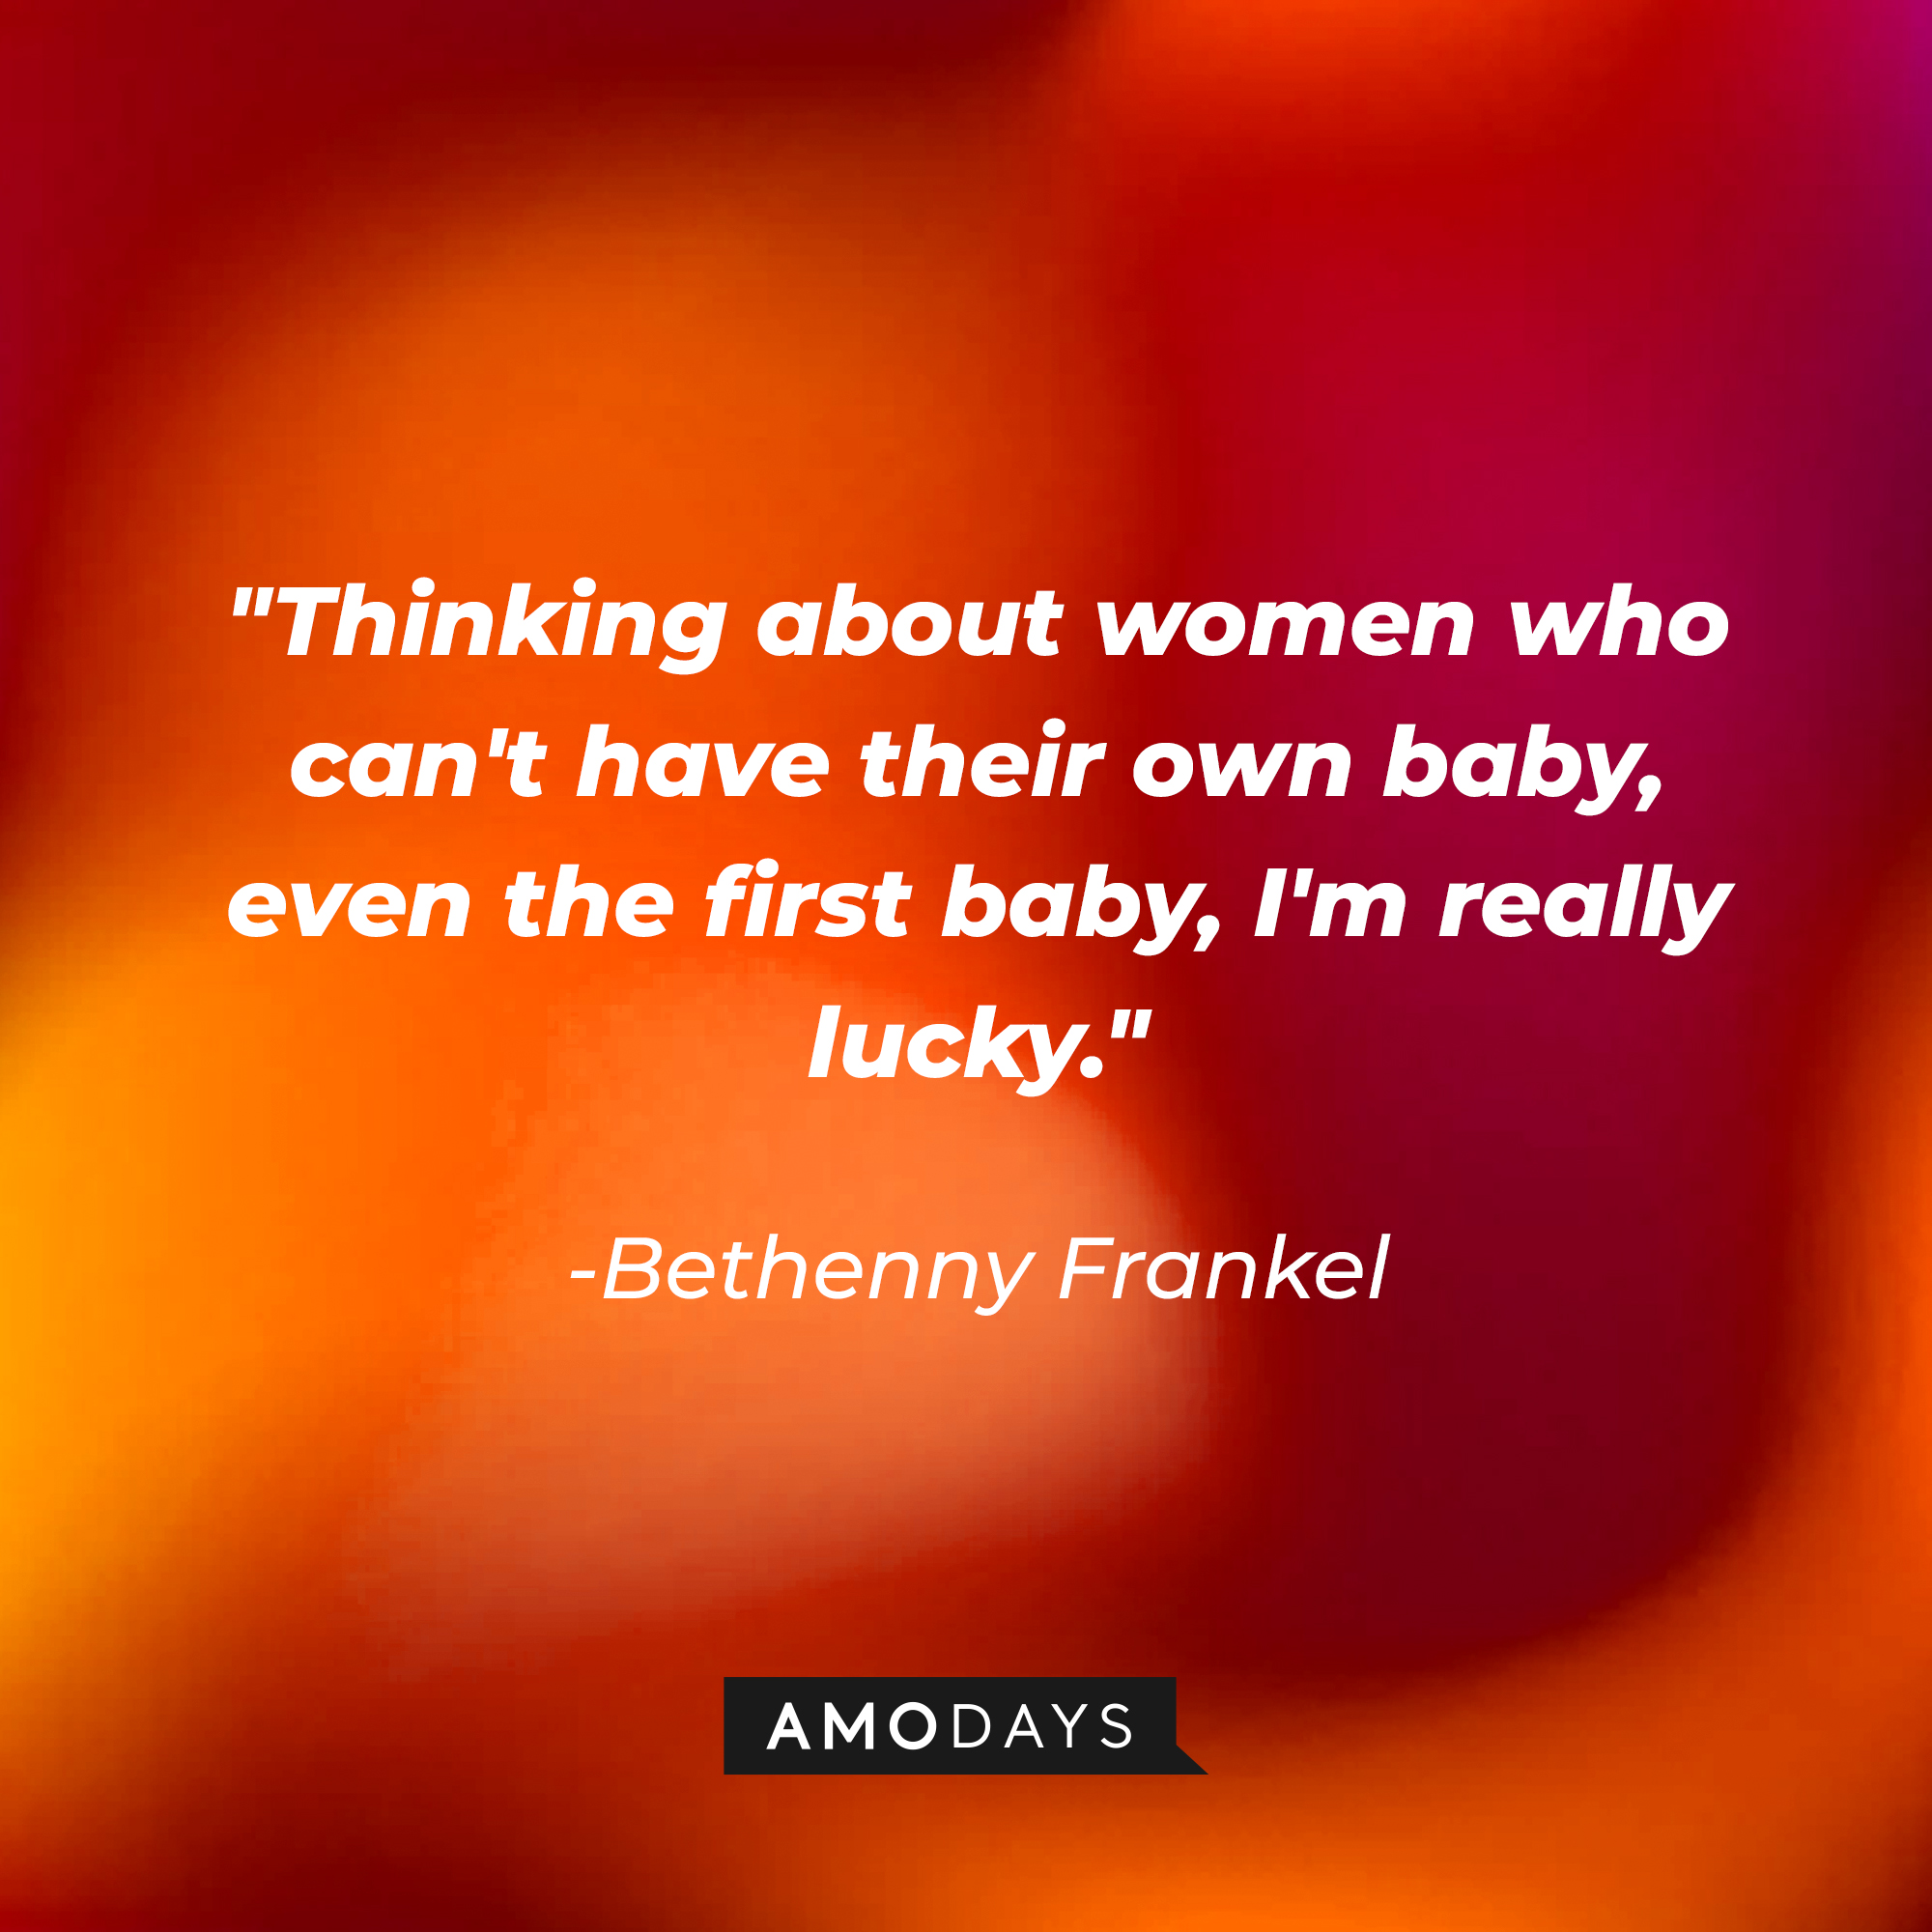 Bethenny Frankel's quote: “Thinking about women who can't have their own baby, even the first baby, I'm really lucky.” | Source: Amodays